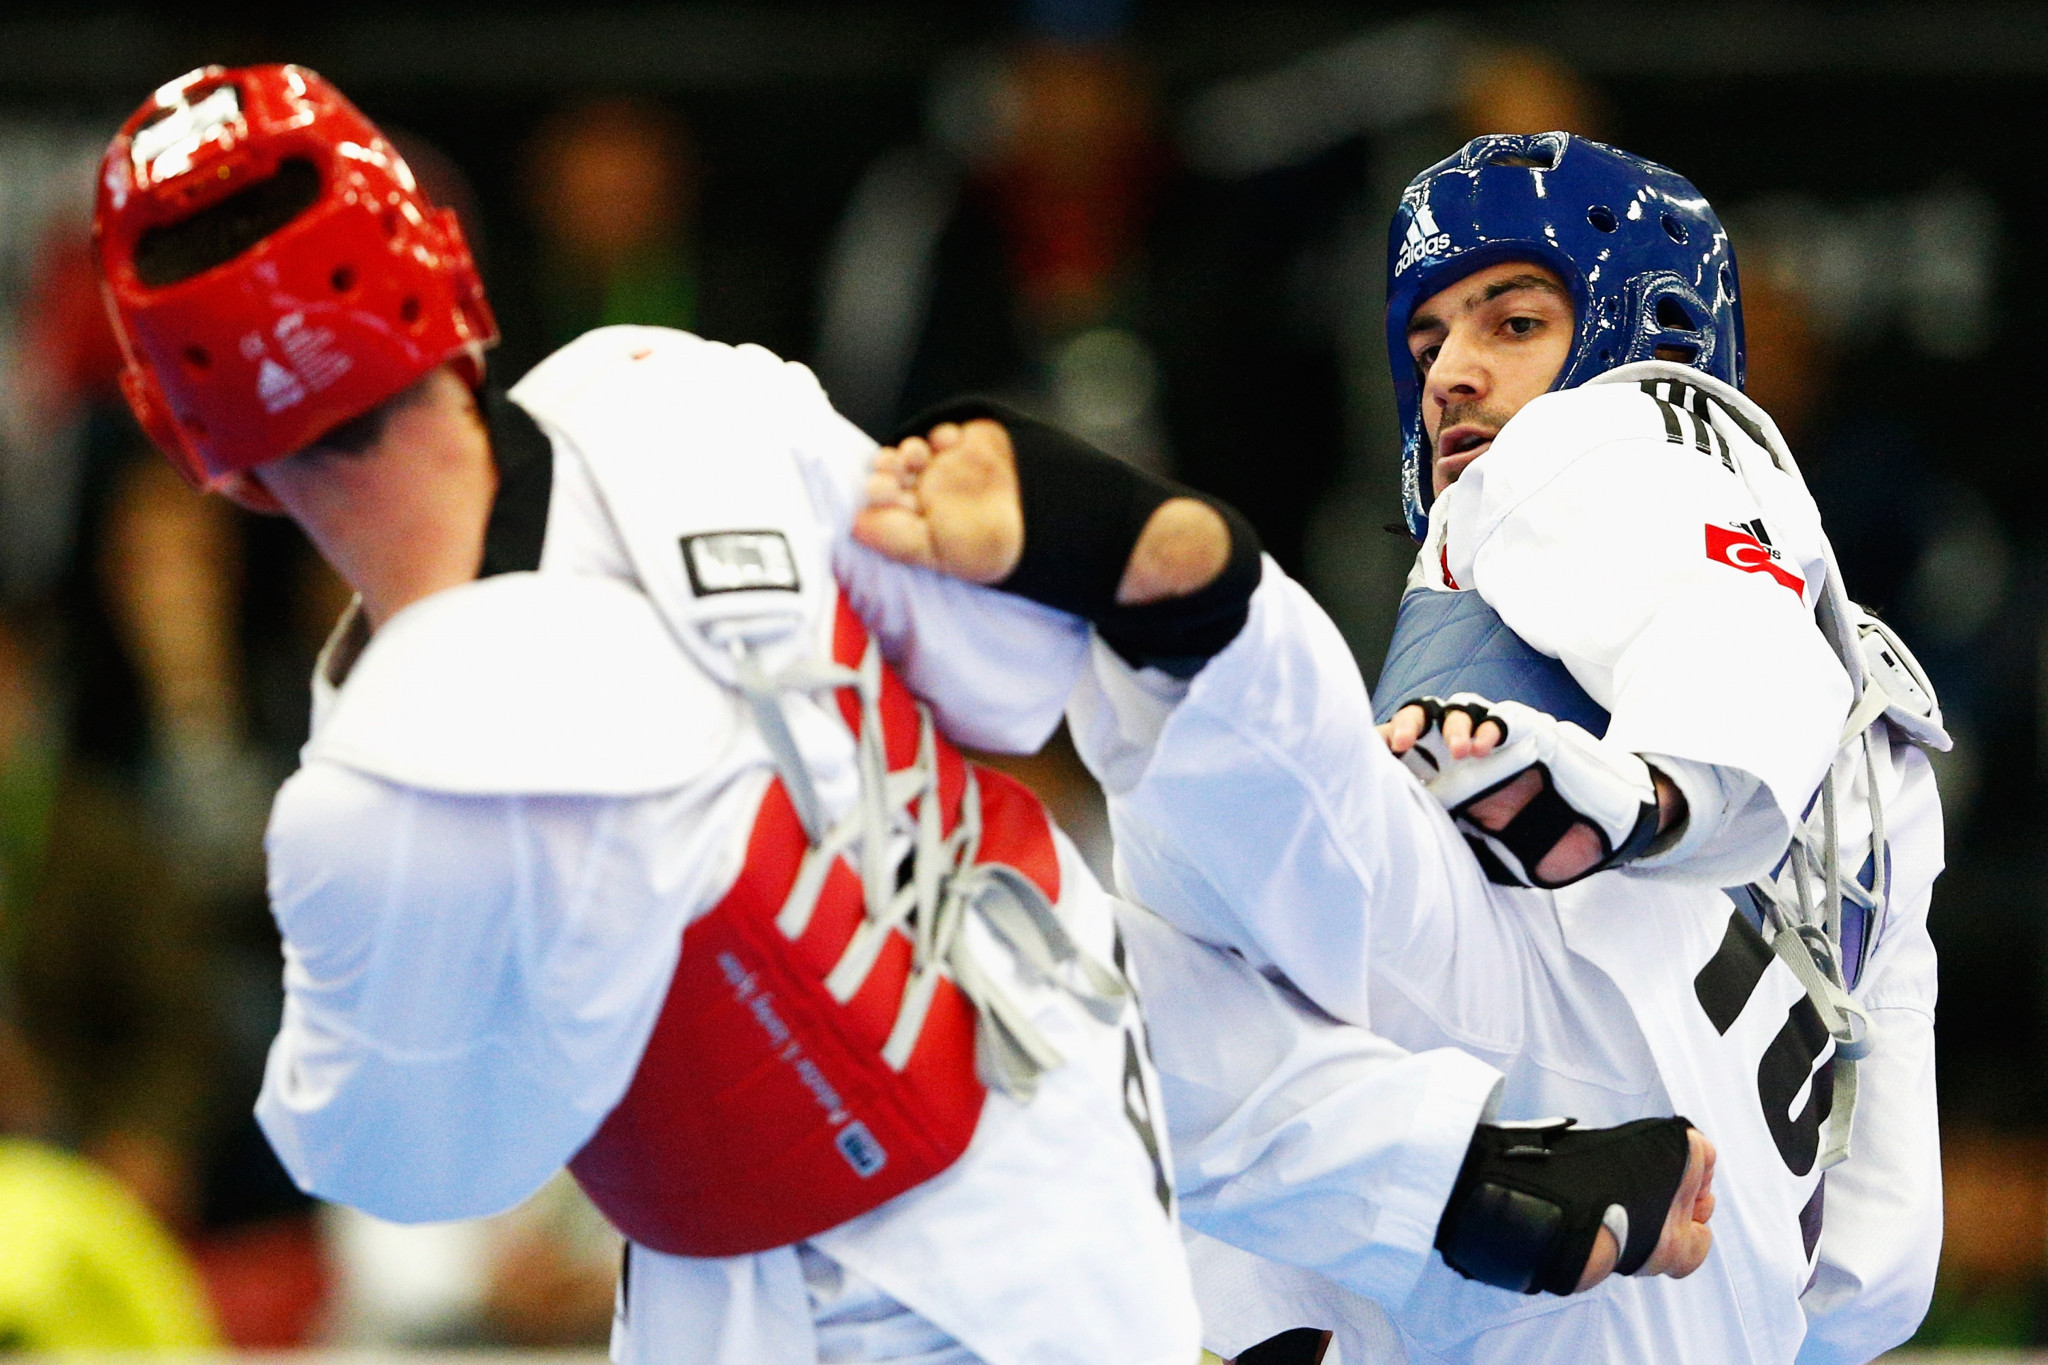 Turkish taekwondo player Yunus Sari, a 2011 world silver medallist and 2013 European champion, was among those that took part in the UBL pilot events ©Getty Images